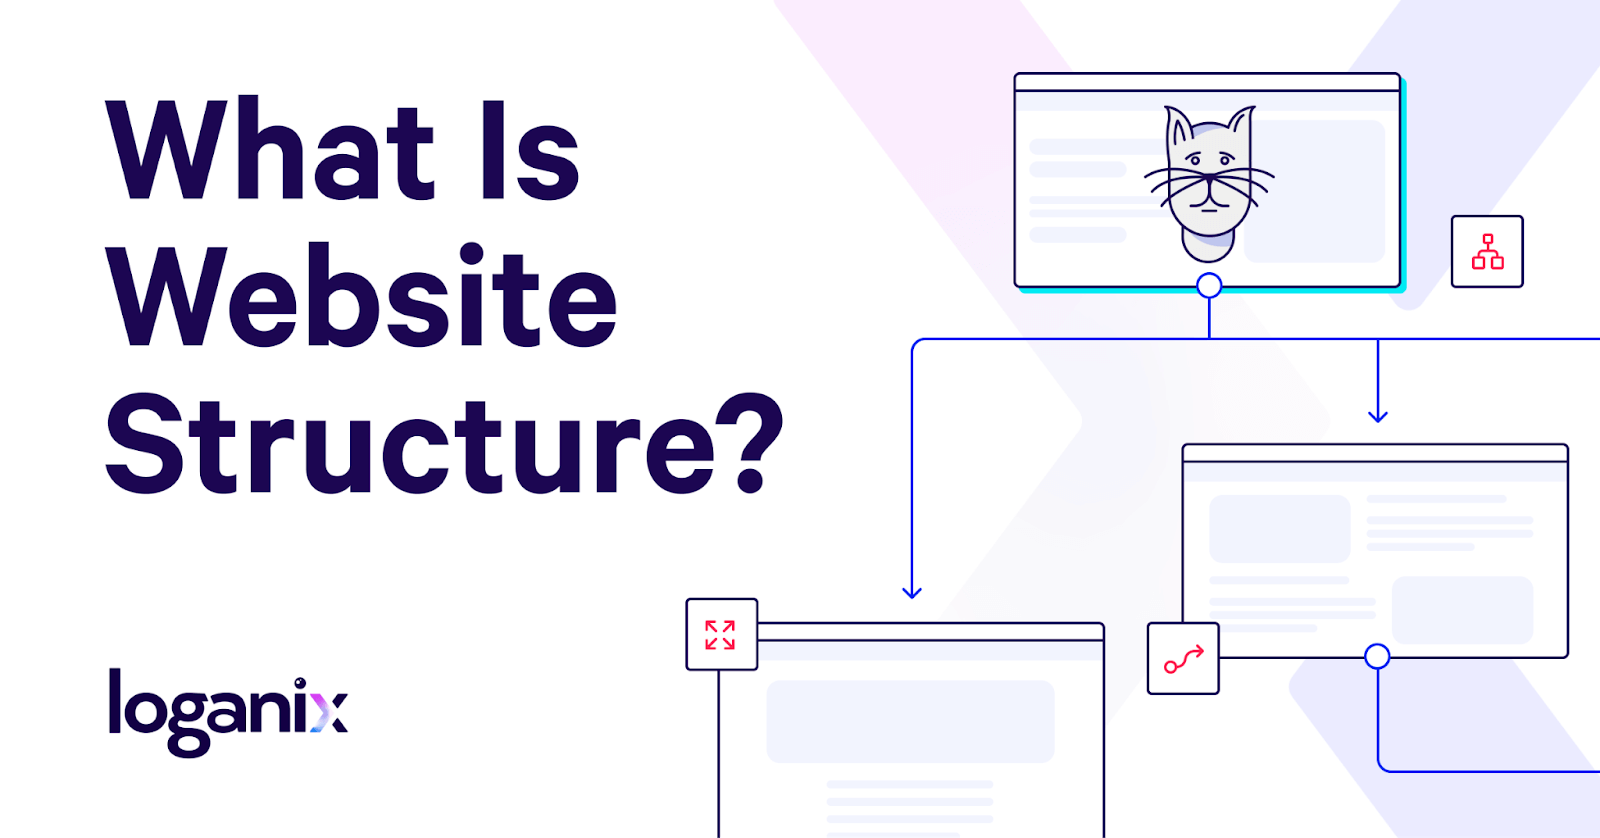 What Is Website Structure?